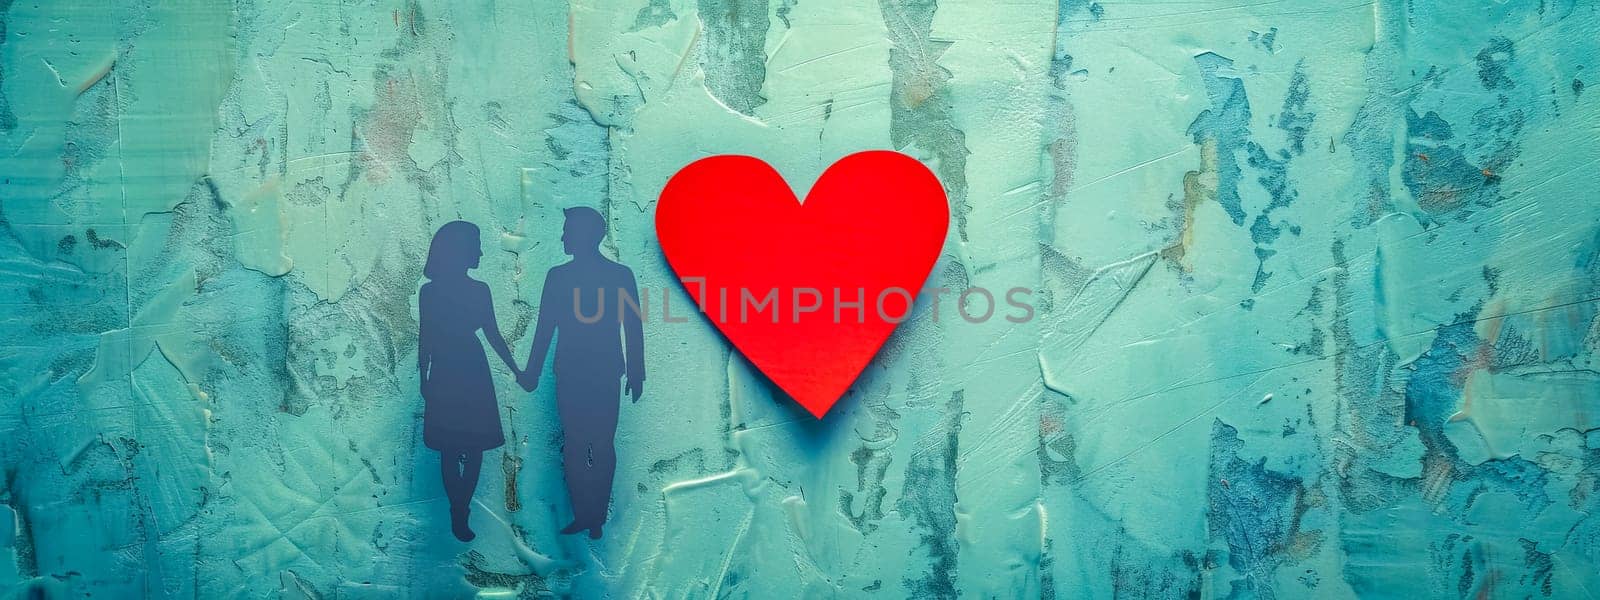 Silhouette of couple with red heart on textured background by Edophoto